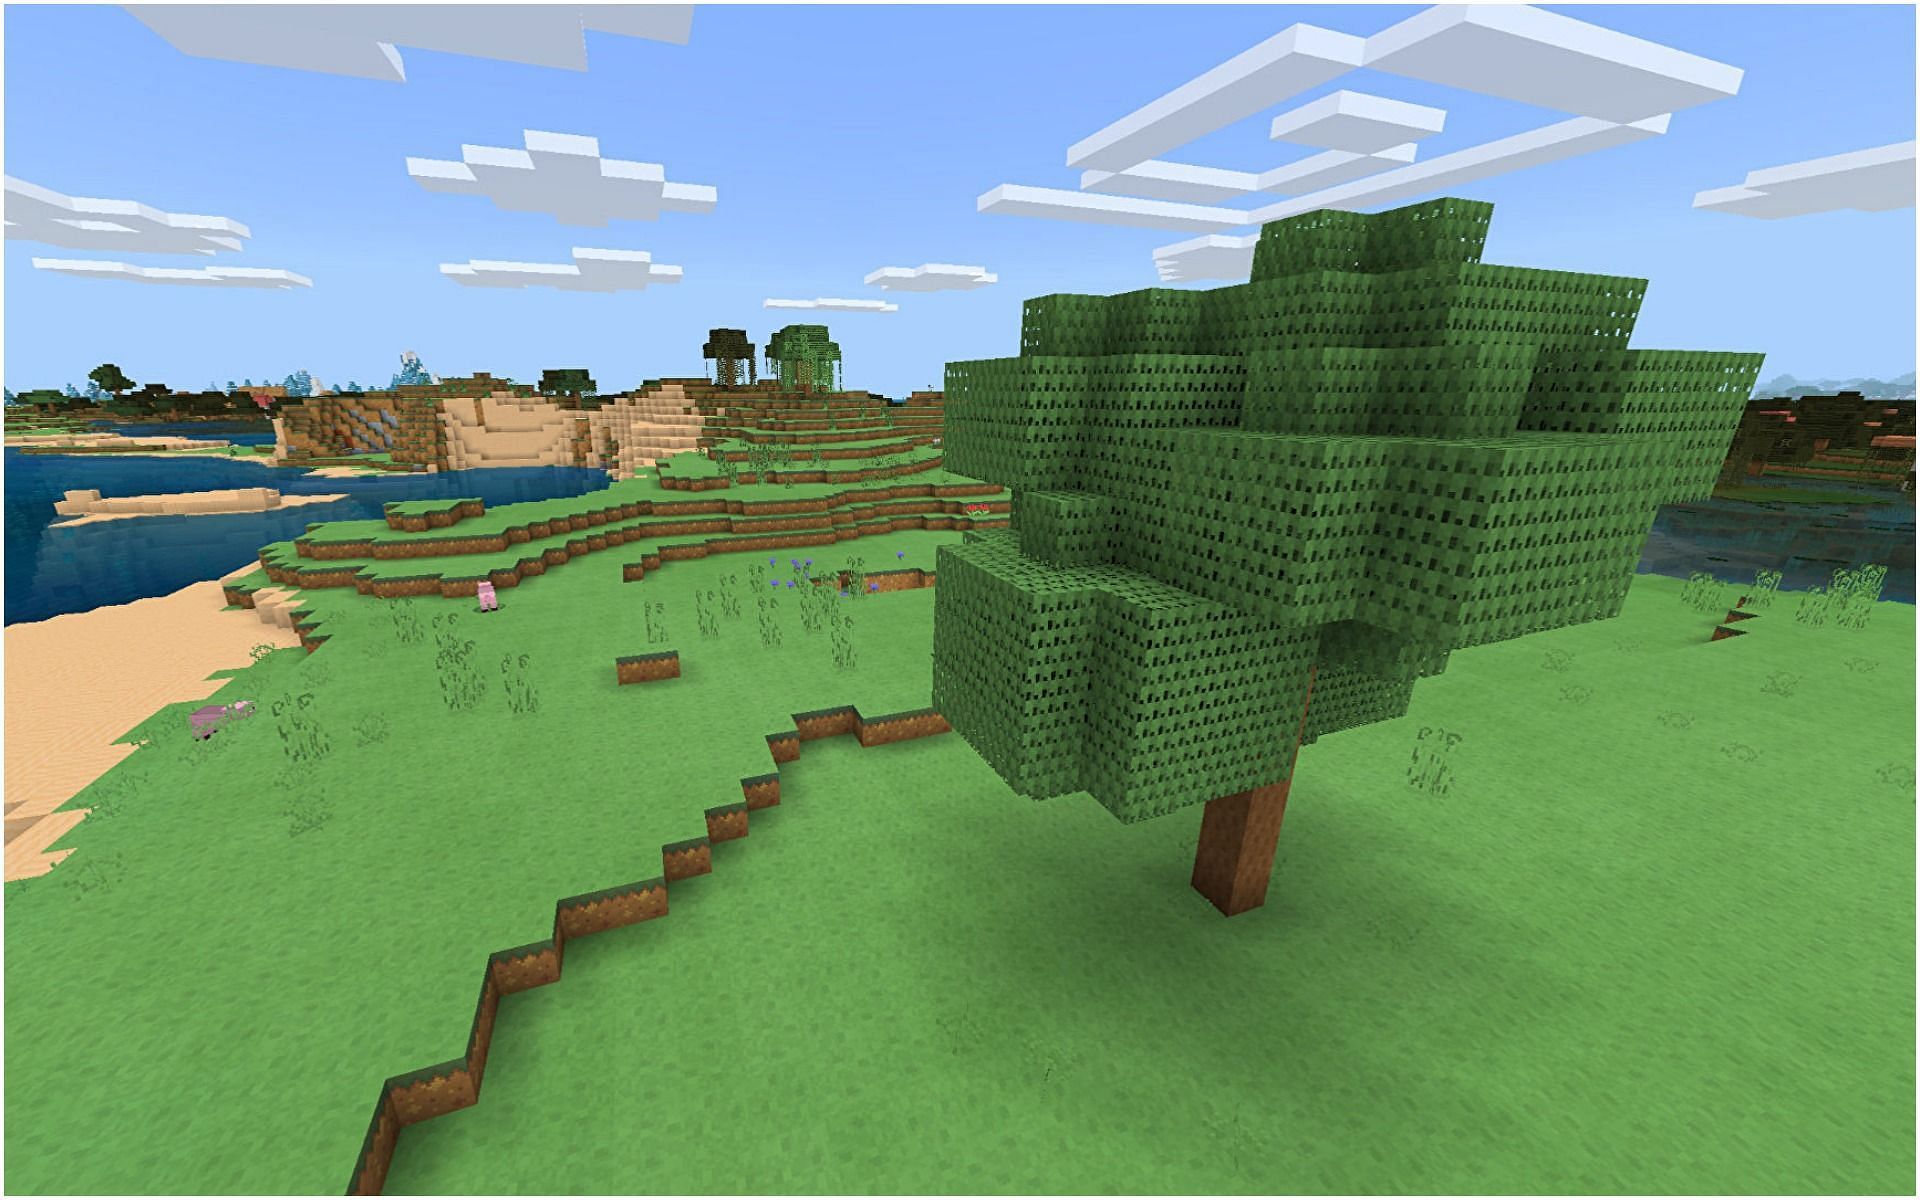 Minecraft Bedrock is one of the most popular versions of the game (Image via Minecraft)